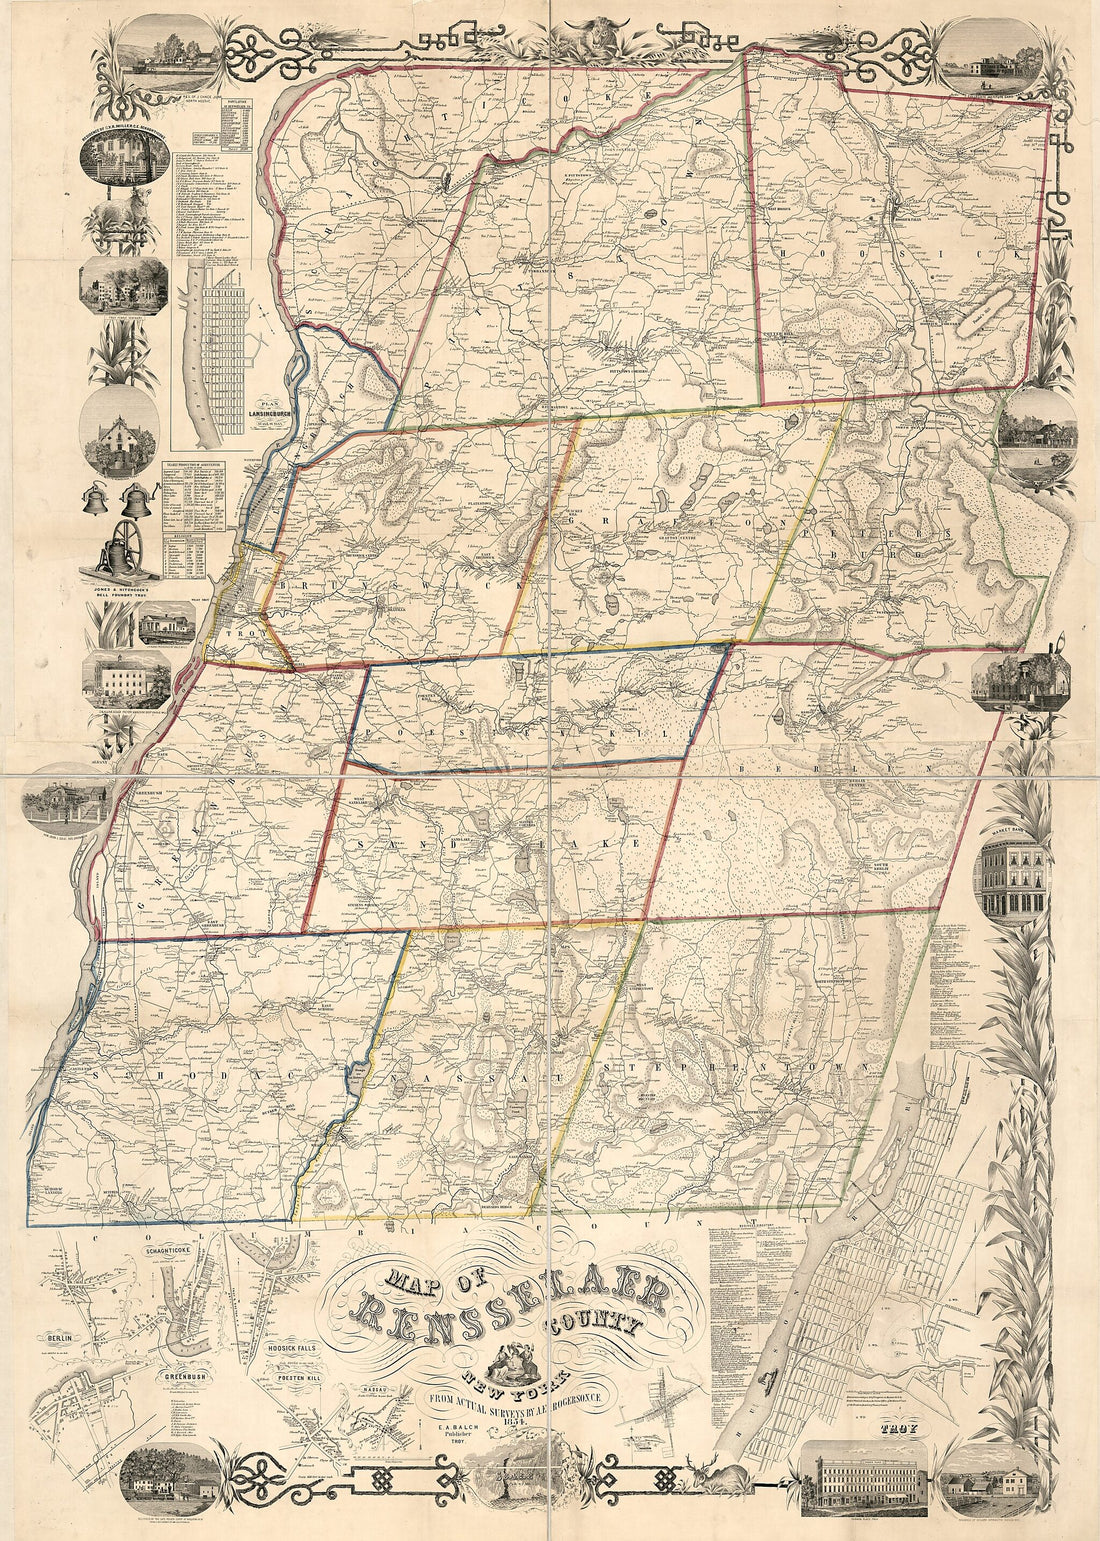 This old map of Map of Rensselaer County, New York : from Actual Surveys from 1854 was created by E. A. Balch, A. E. (Andrew E.) Rogerson, Robert Pearsall Smith in 1854